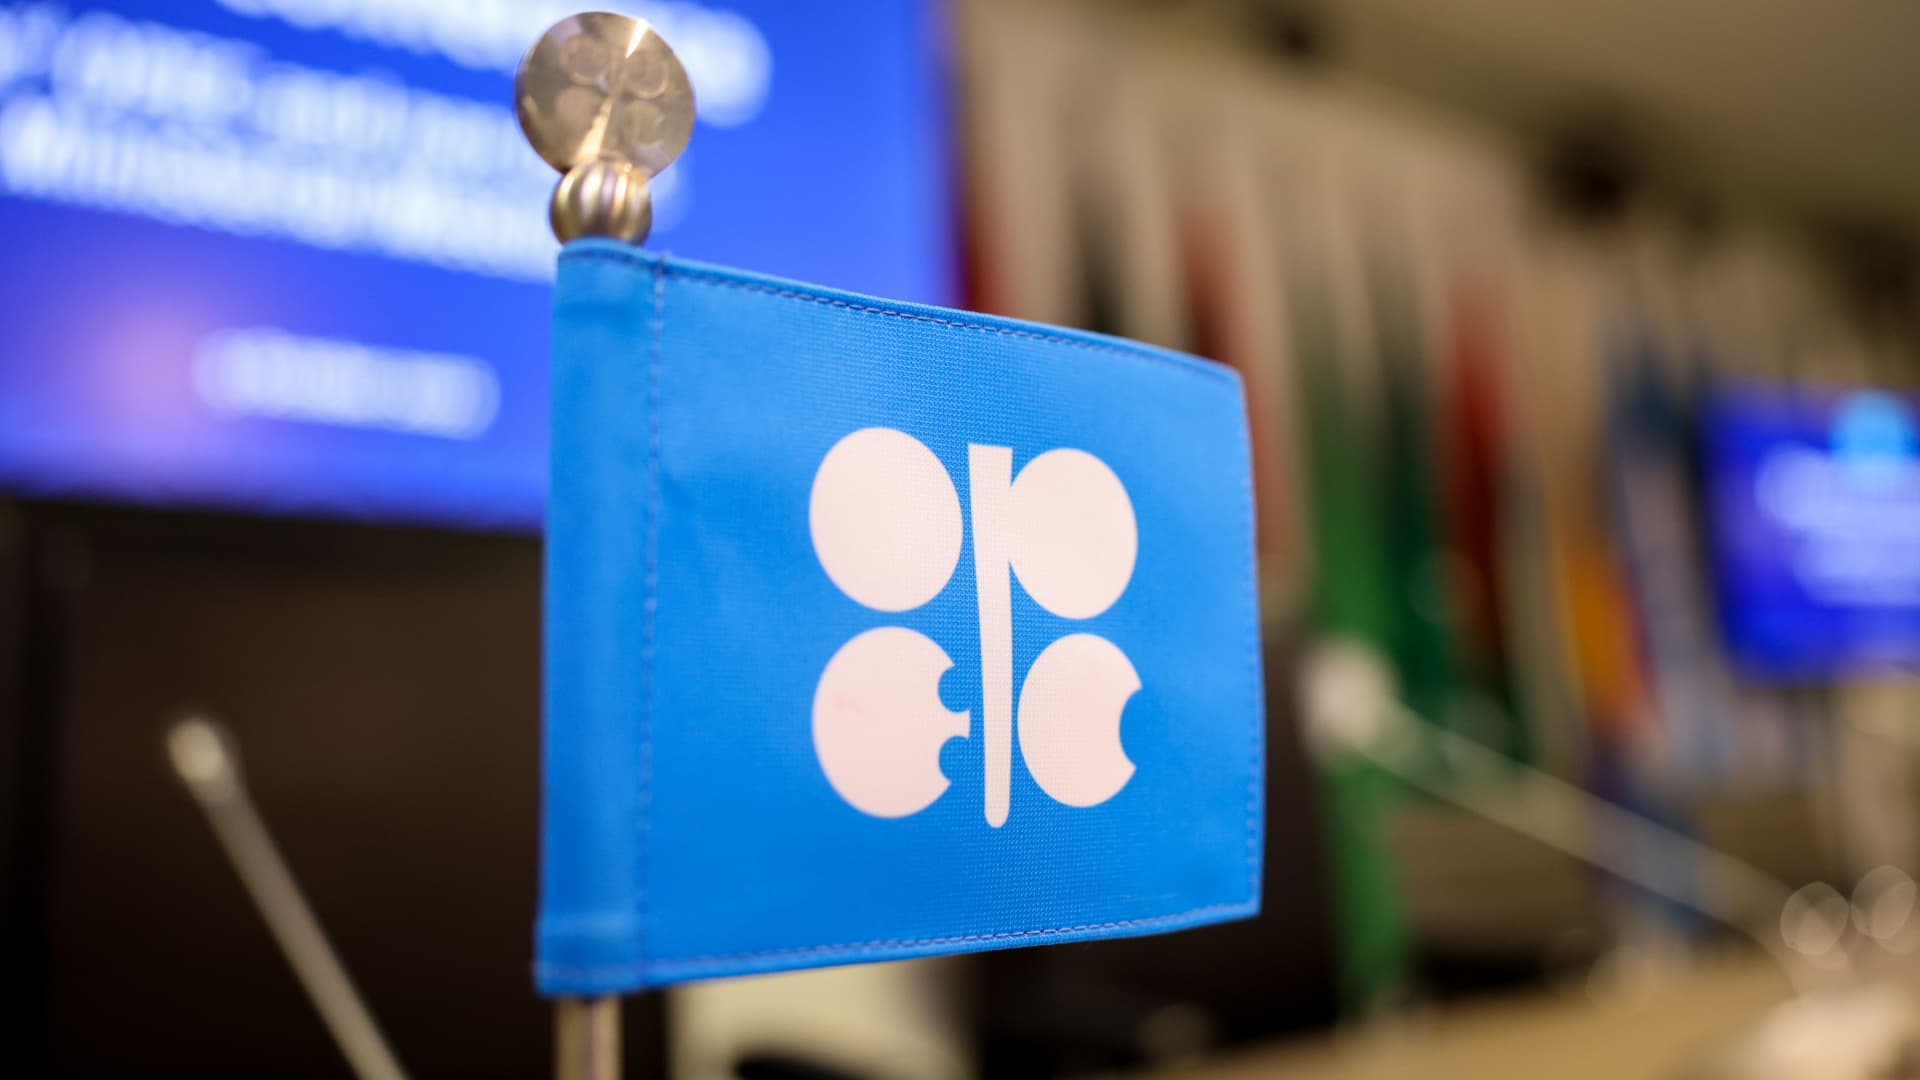 White House races to block expected OPEC+ production cut